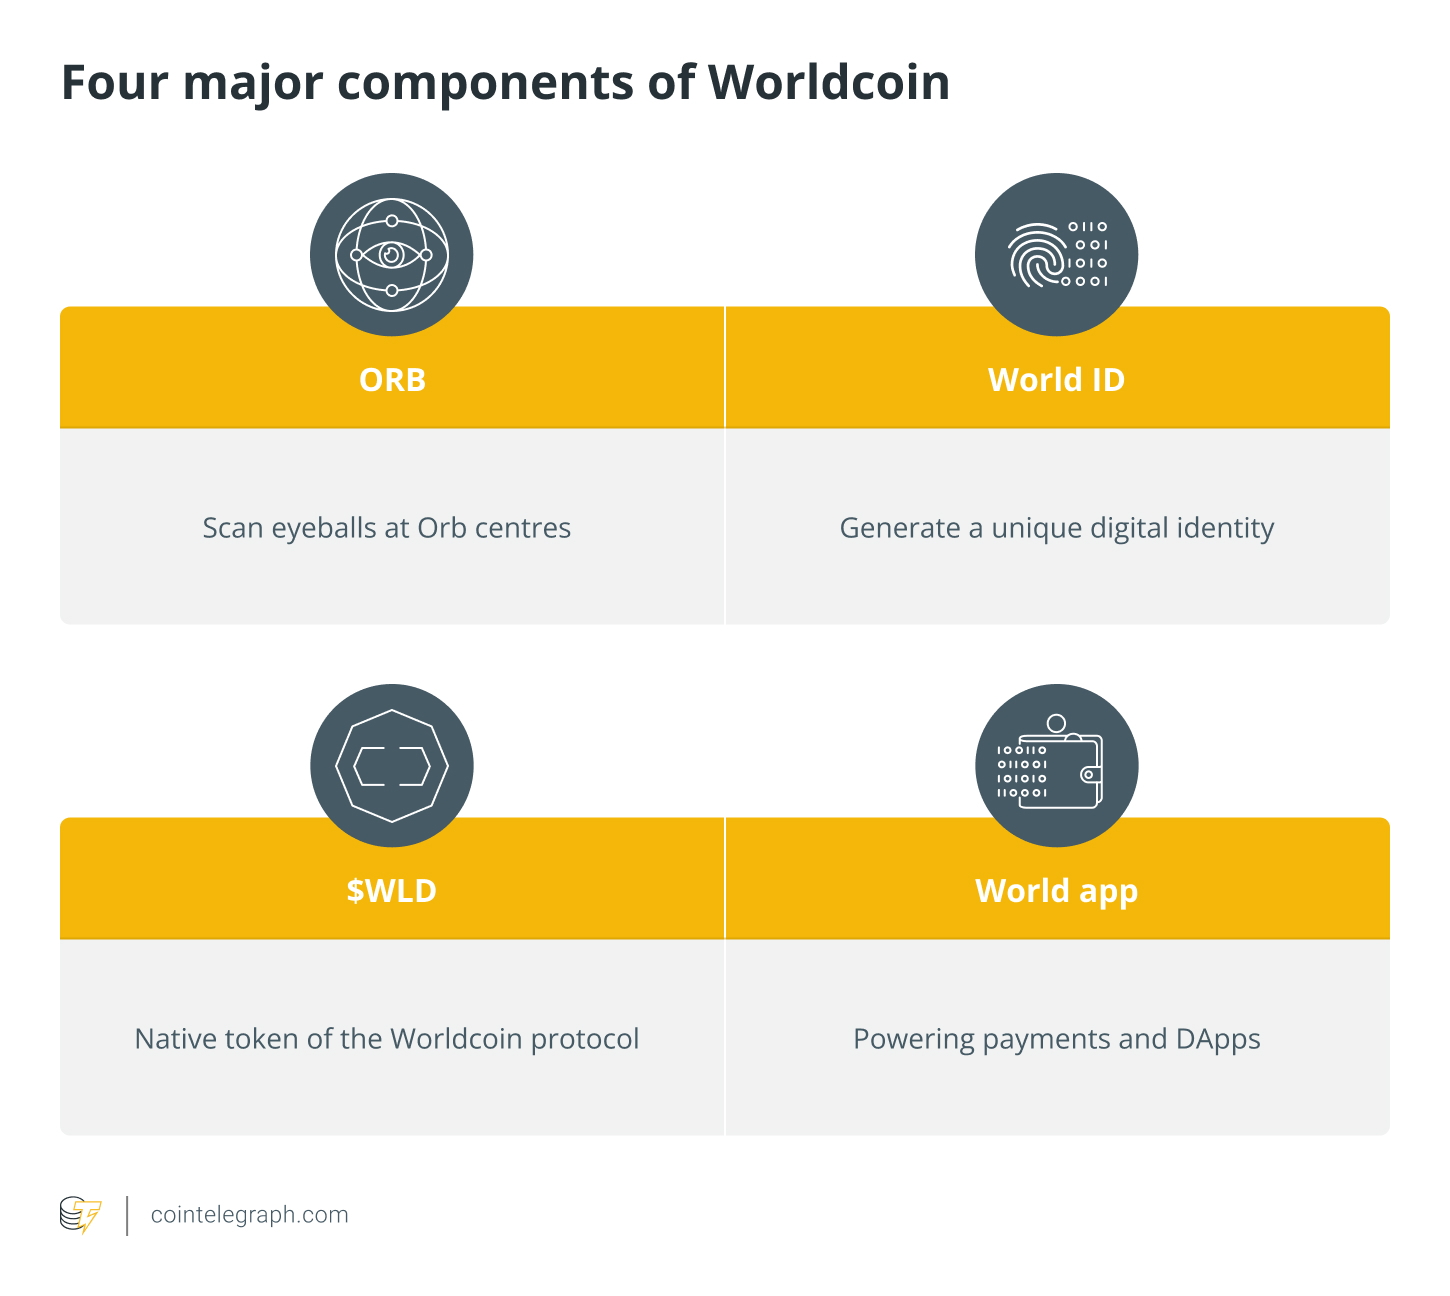 Four major components of Worldcoin